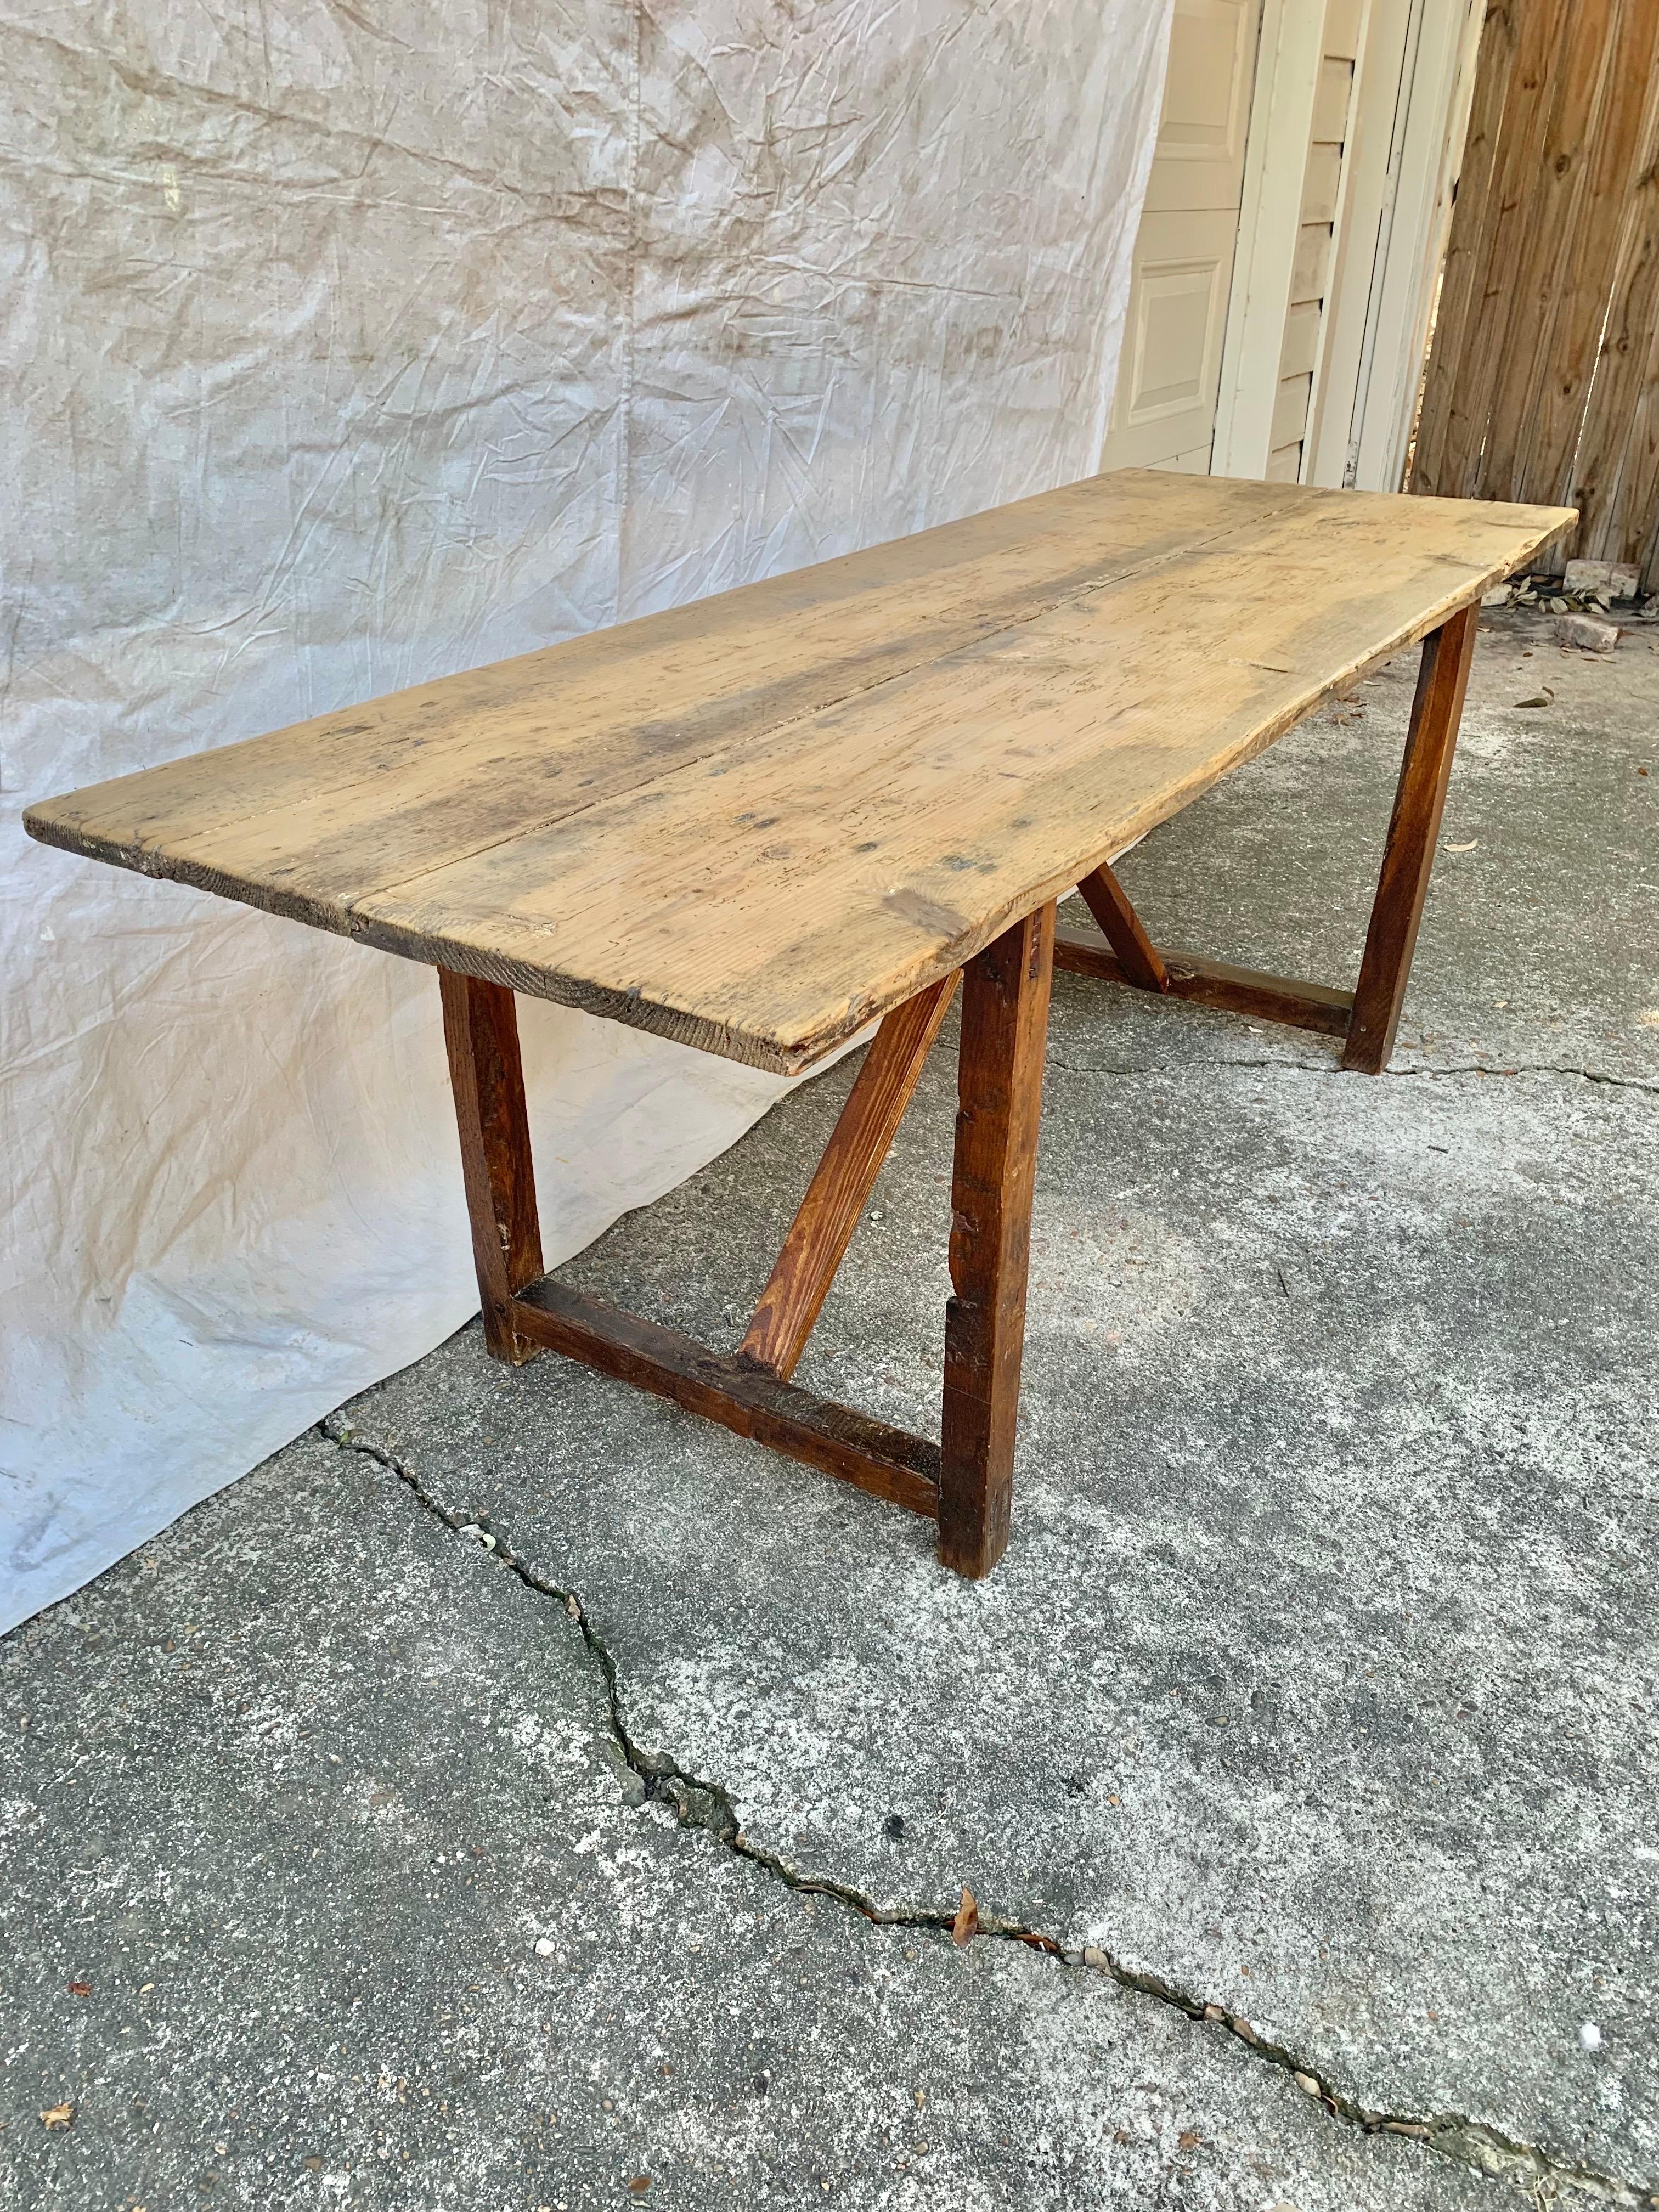 Found in the South of France, this French Trestle Table was crafted from old growth pine by French artisans in the early 1900's. The table features a 1